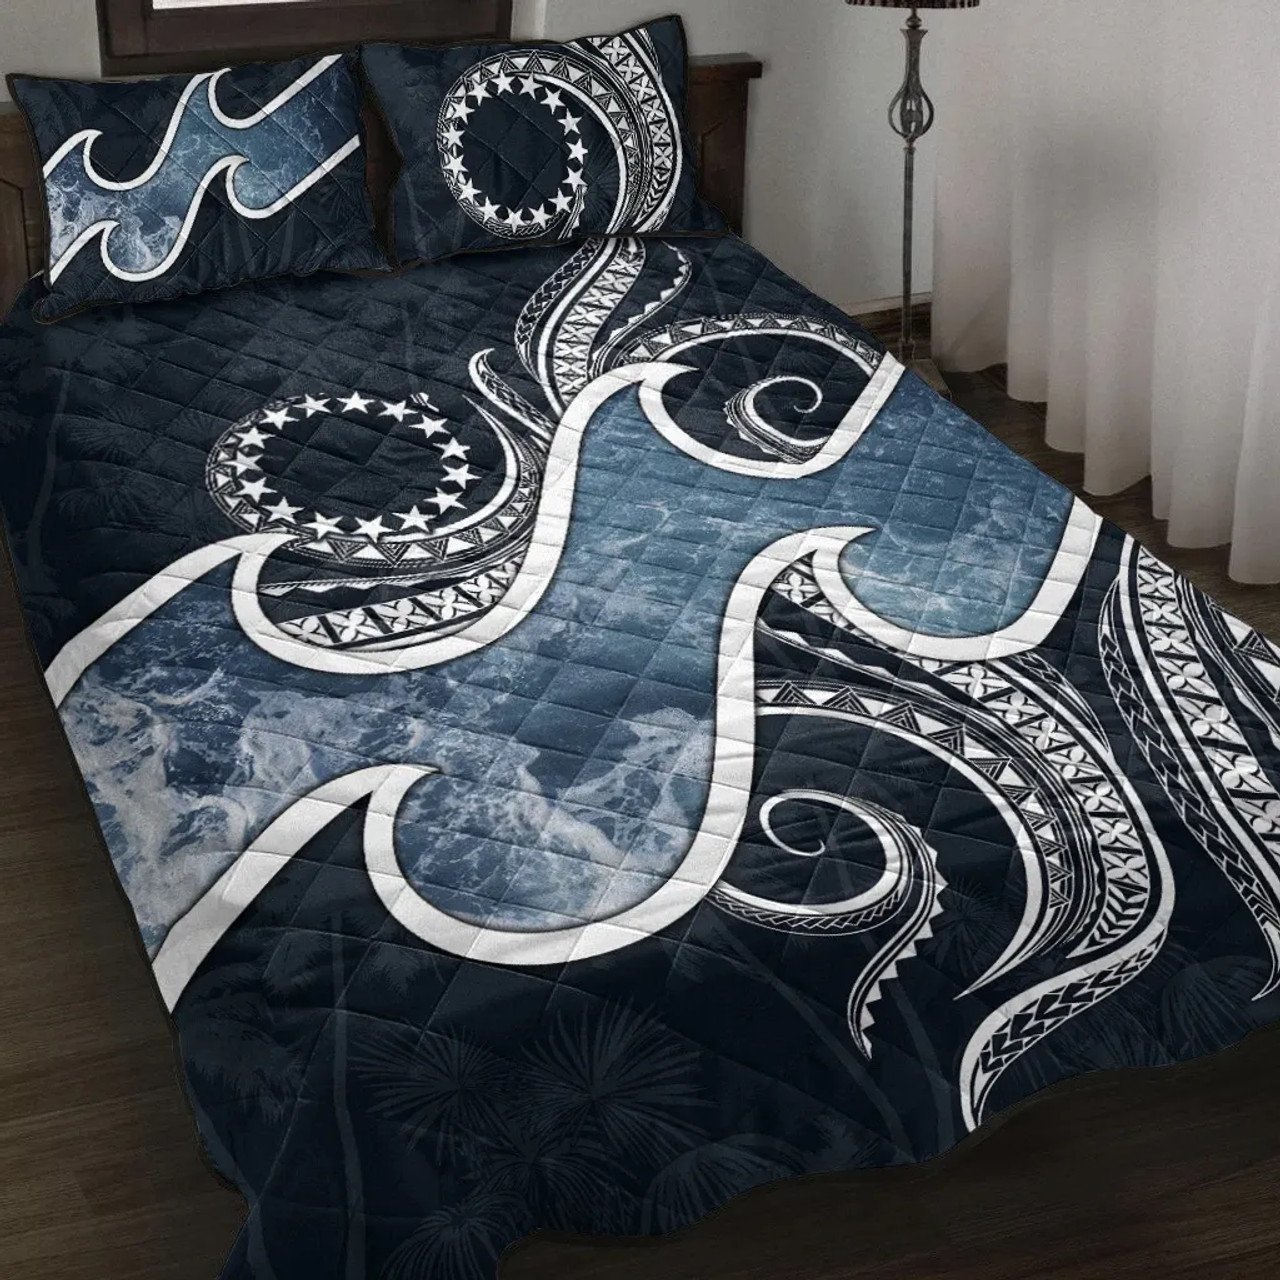 Cook Islands Polynesian Quilt Bed Set - Ocean Style 1